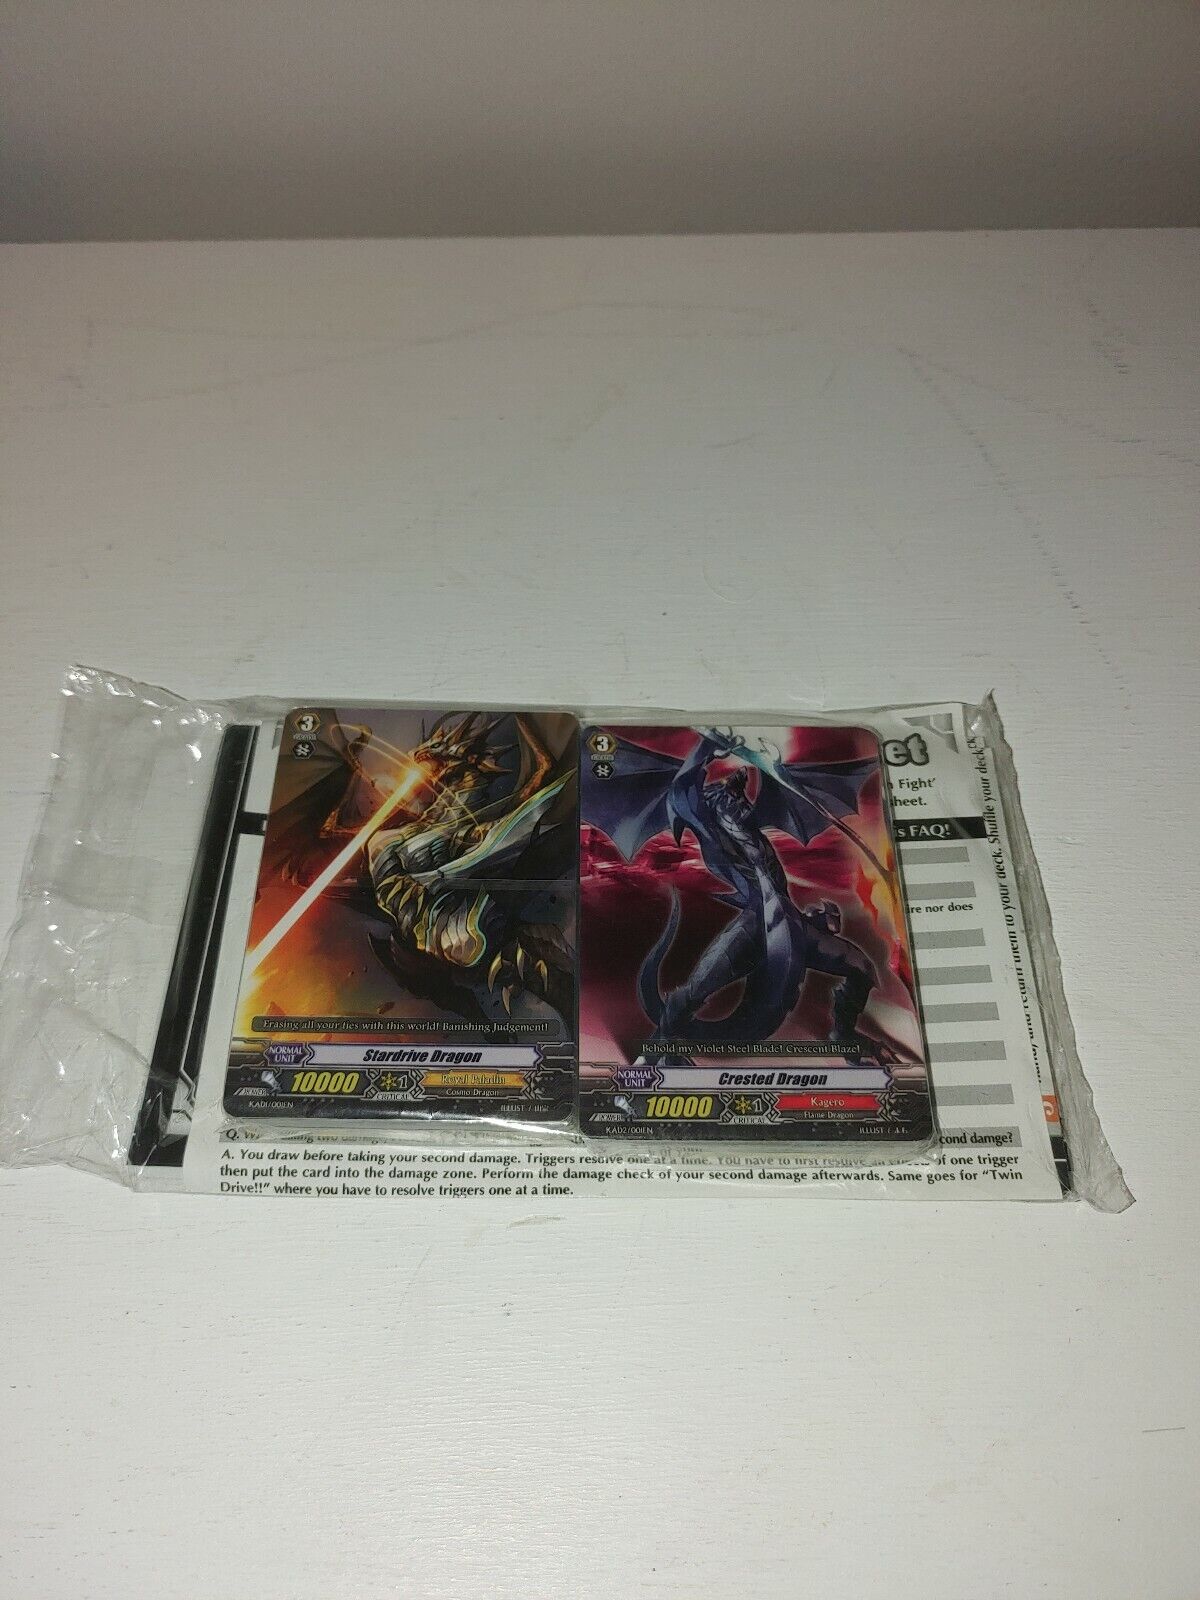 CardFight Vanguard Promo Demo Decks - Stardrive And Crested Dragons W/ Rules